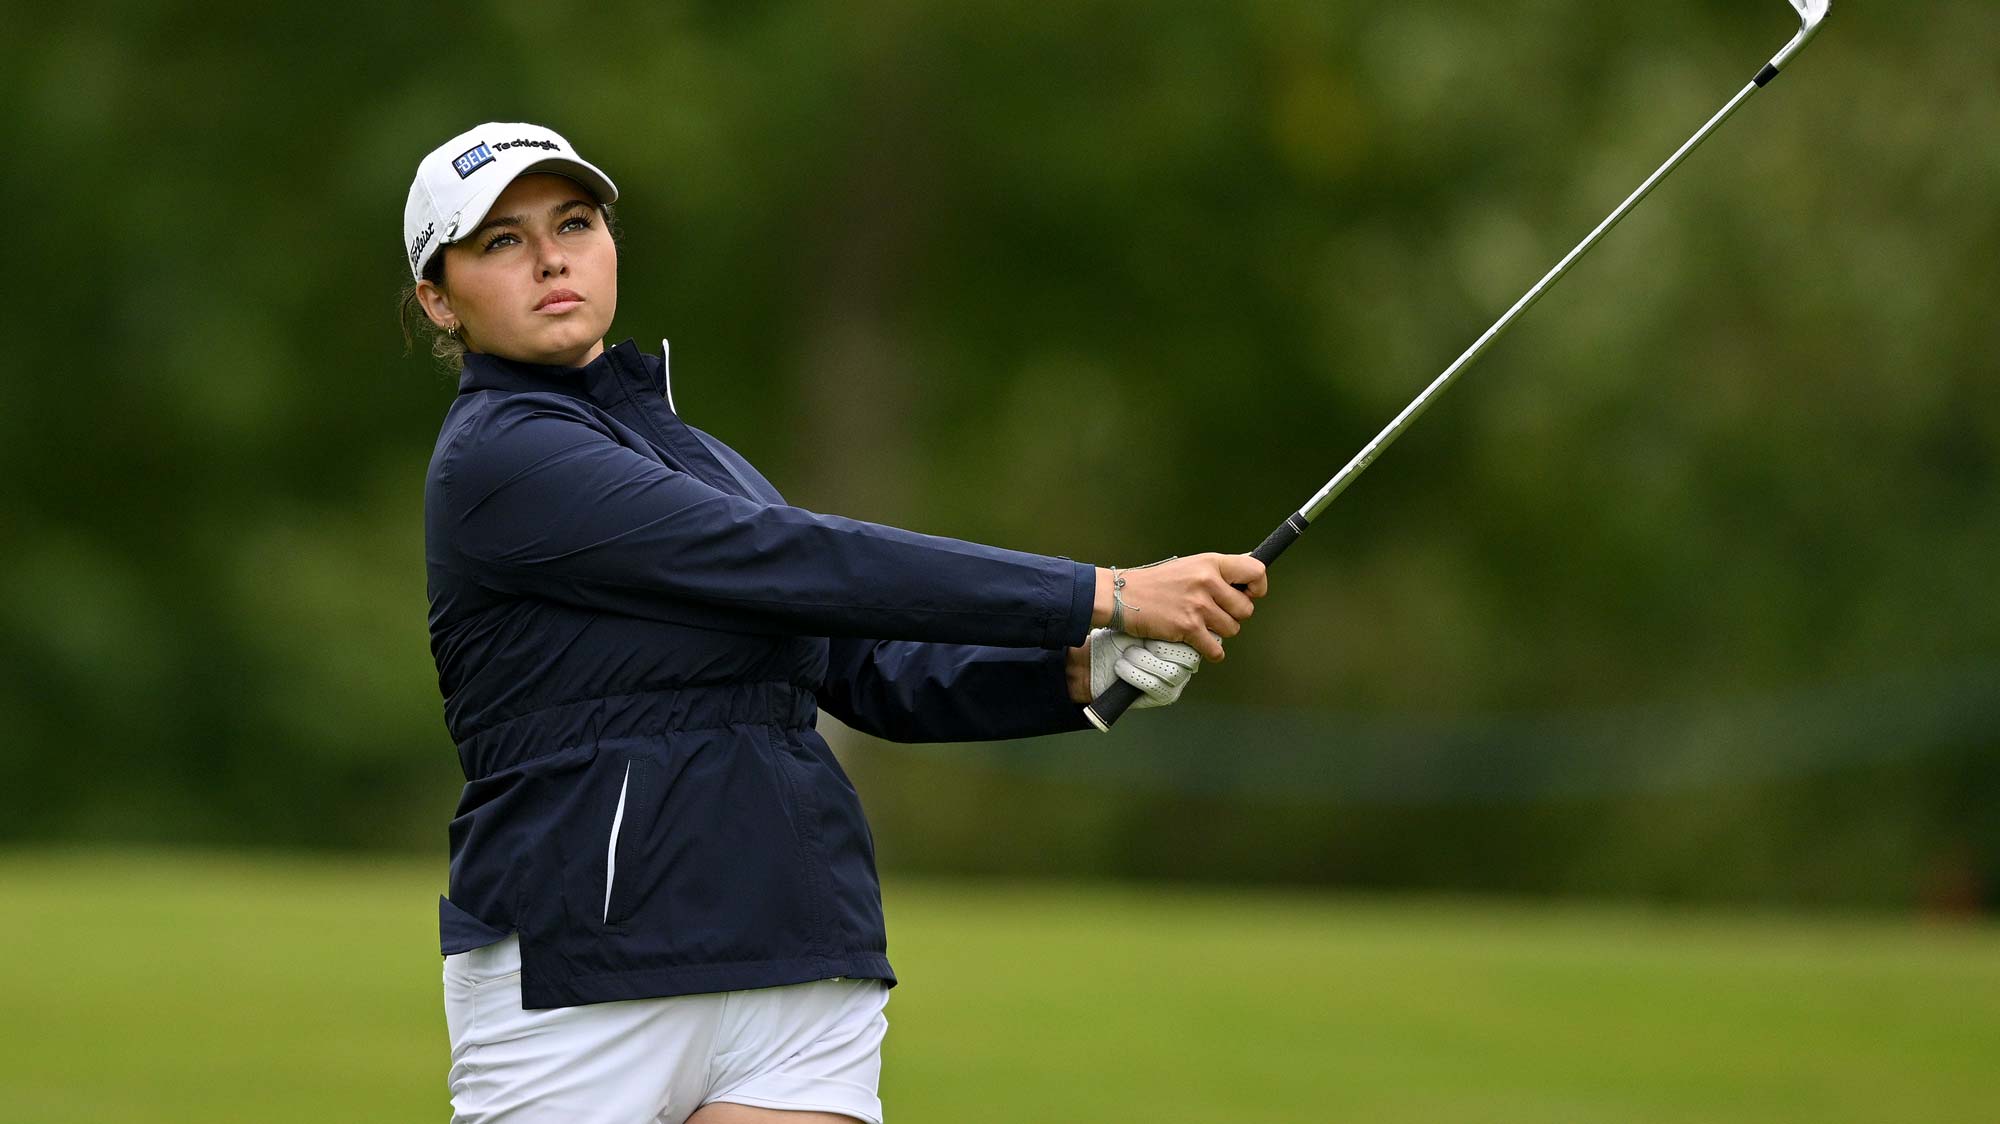 Alexa Pano of the United States plays her second shot from the 17th hole on Day Four of the ISPS HANDA World Invitational presented by AVIV Clinics at Galgorm Castle Golf Club